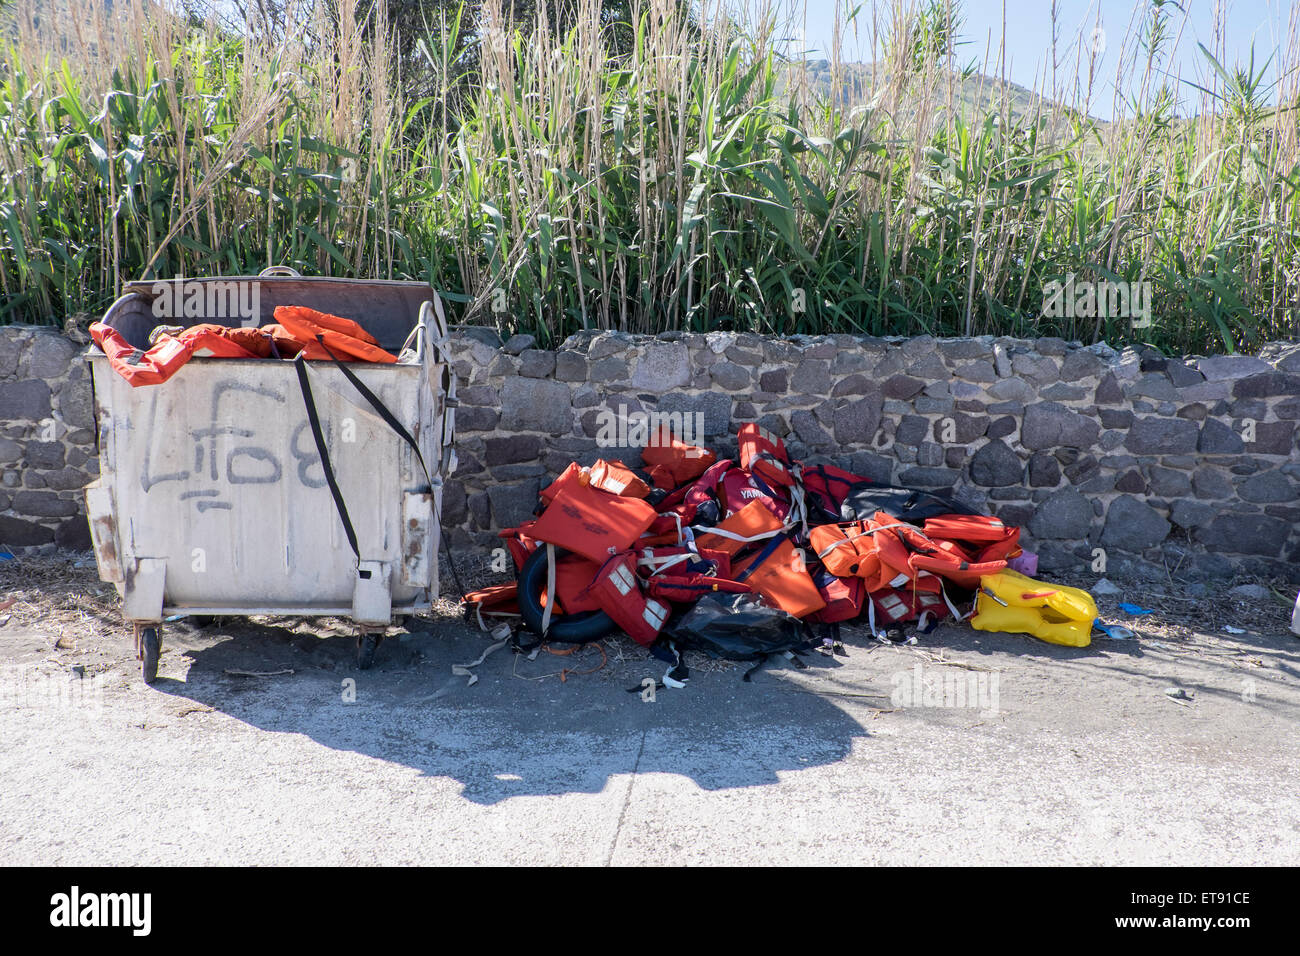 Life vests worn by refugees fleeing Syria and Afghanistan are piled up as trash on a beach in Greece. Stock Photo